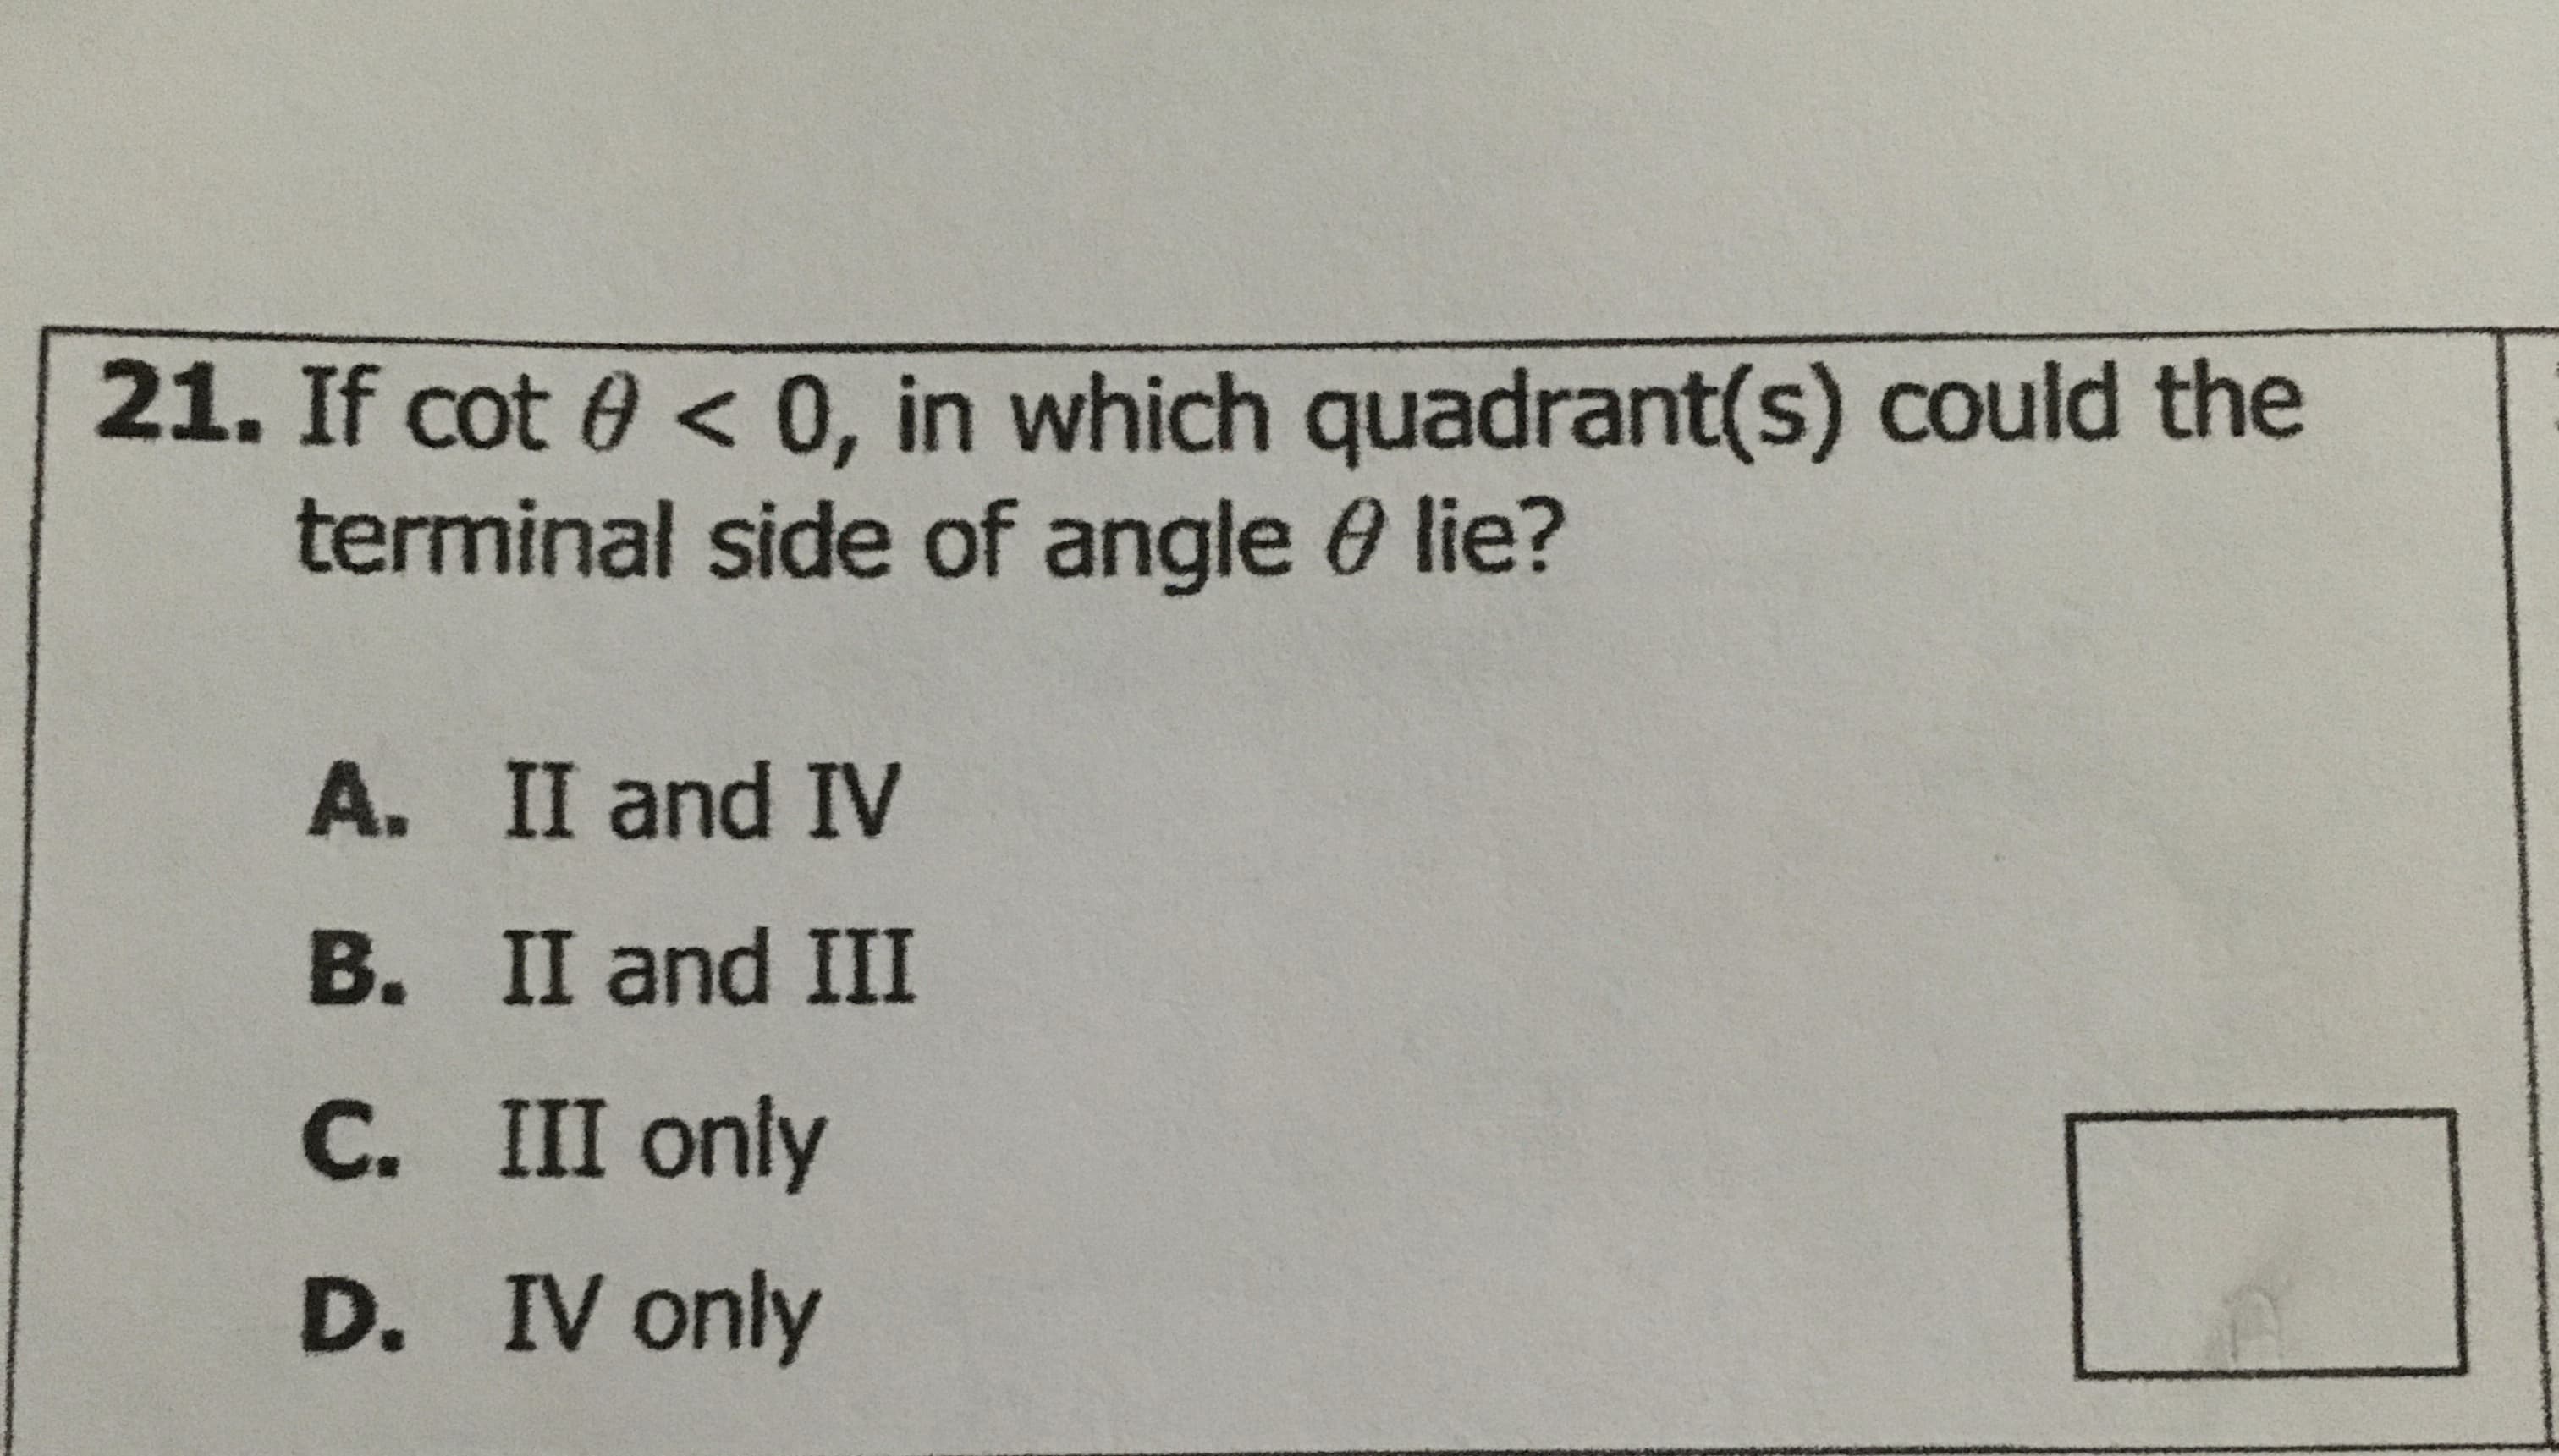 21. If cot 0 < 0, in which quadrant(s) could the
terminal side of angle 0 lie?
A. II and IV
B. II and III
C. III only
D. IV only
